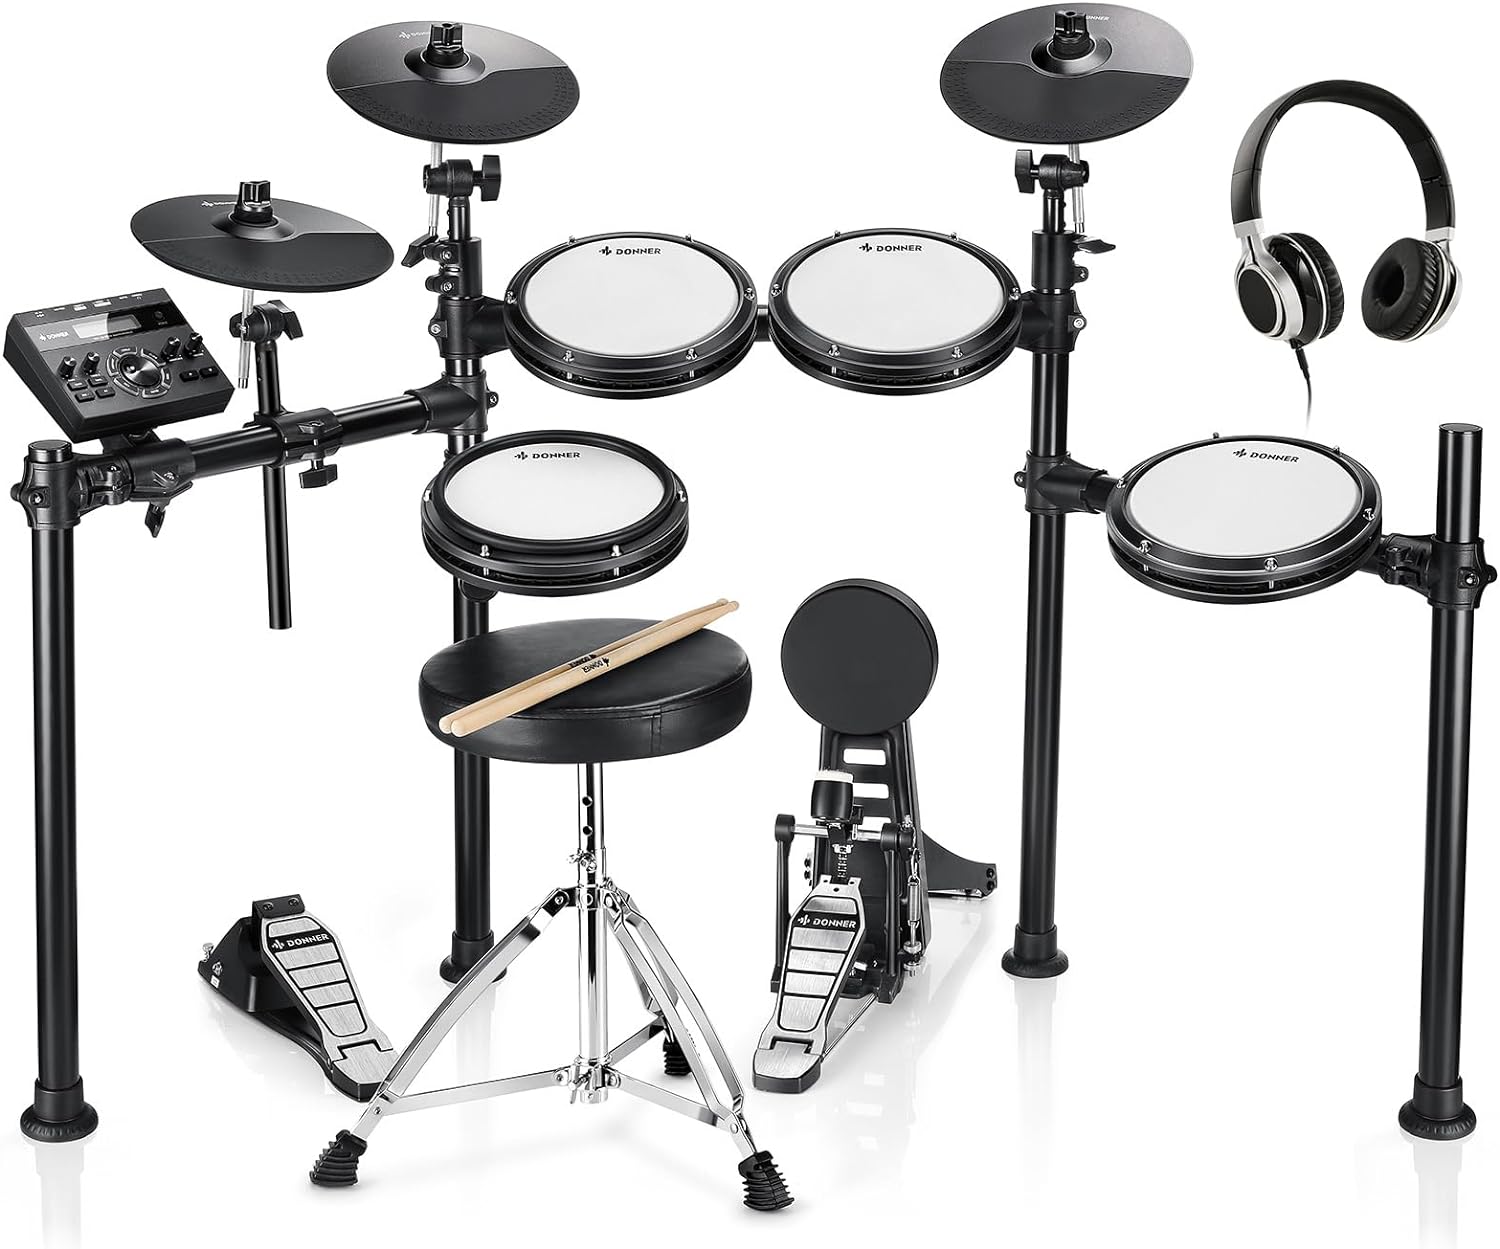 Donner DED-200 Bateria Electronica Musical Kit Completo